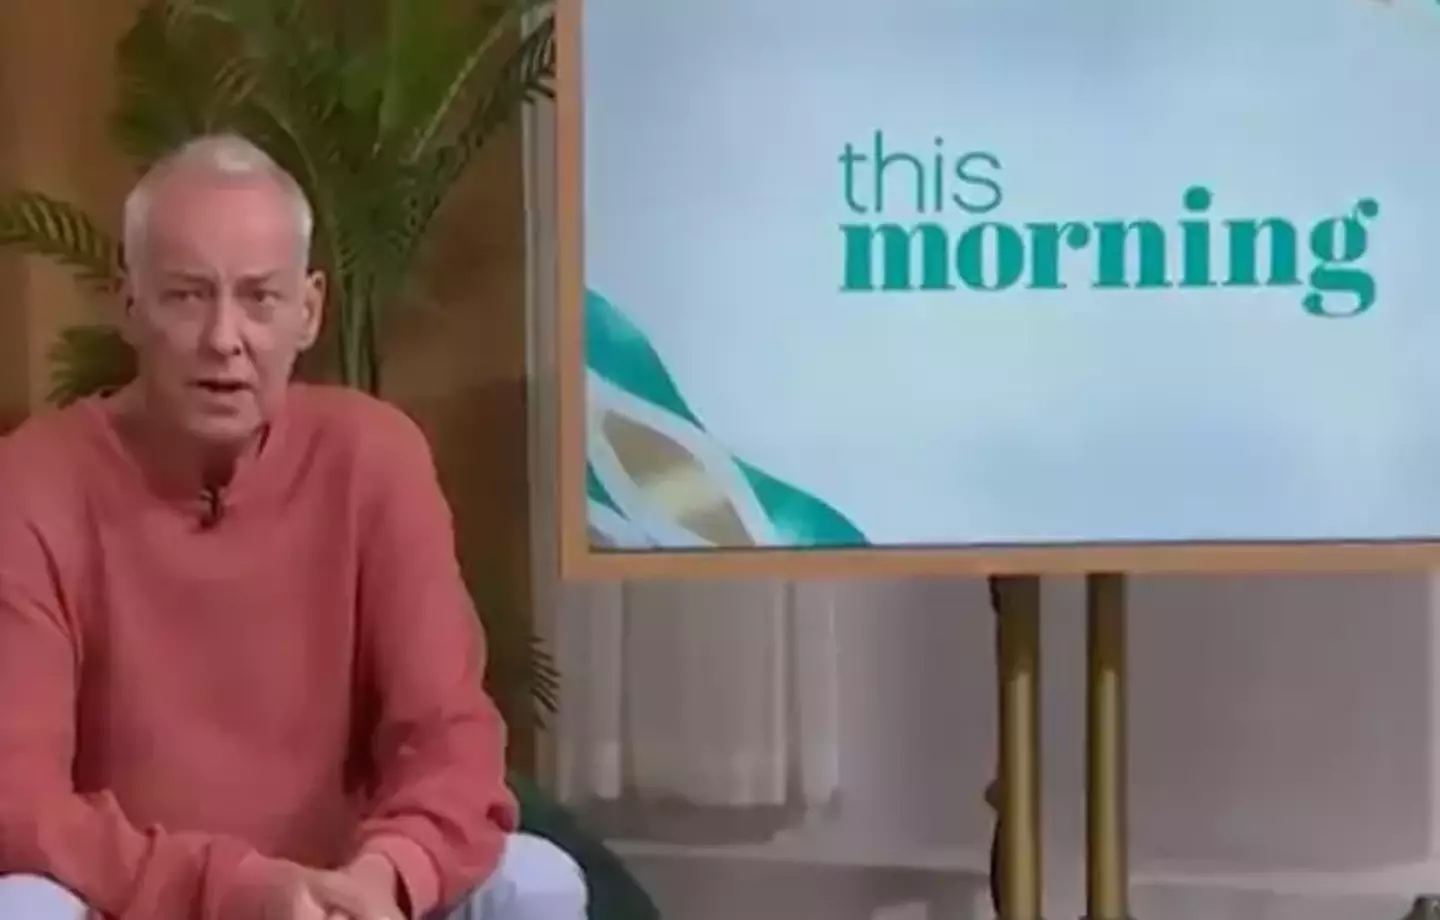 Michael Barrymore fans want him back on TV after his 'car crash' of an interview on This Morning.